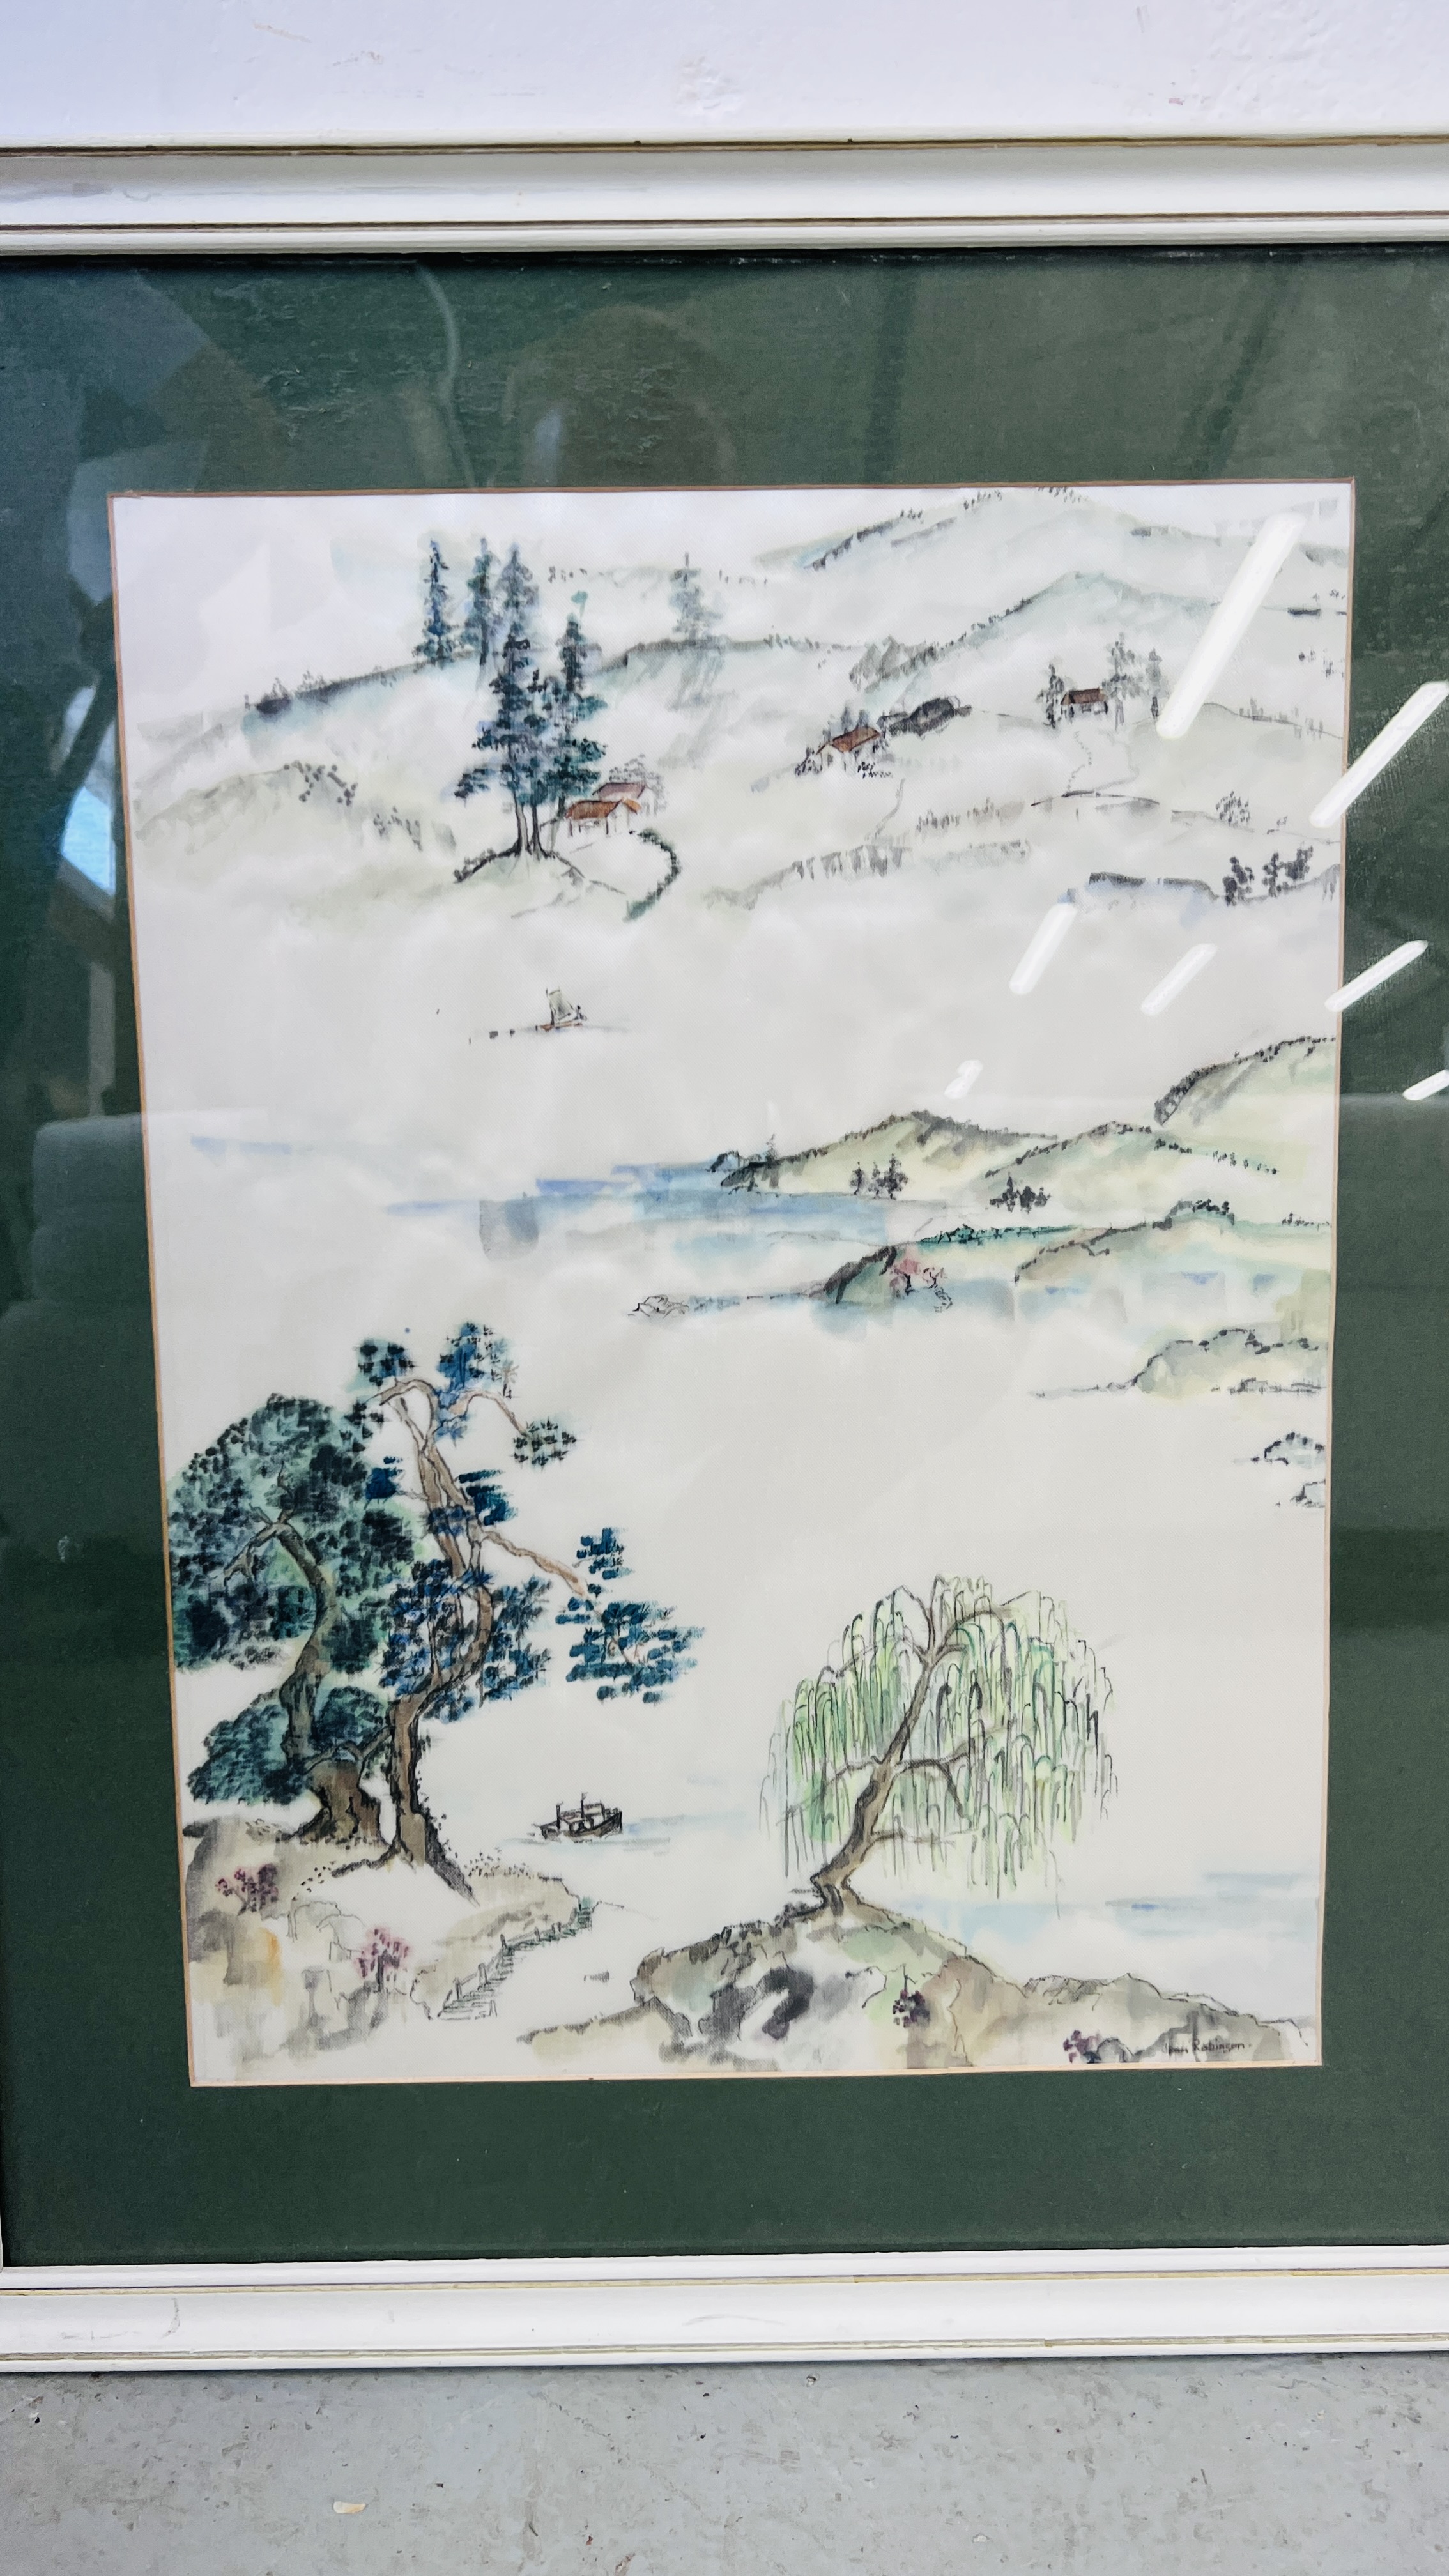 TWO FRAMED CHINESE BRUSH PAINTINGS BY JEAN ROBINSON. - Image 2 of 3